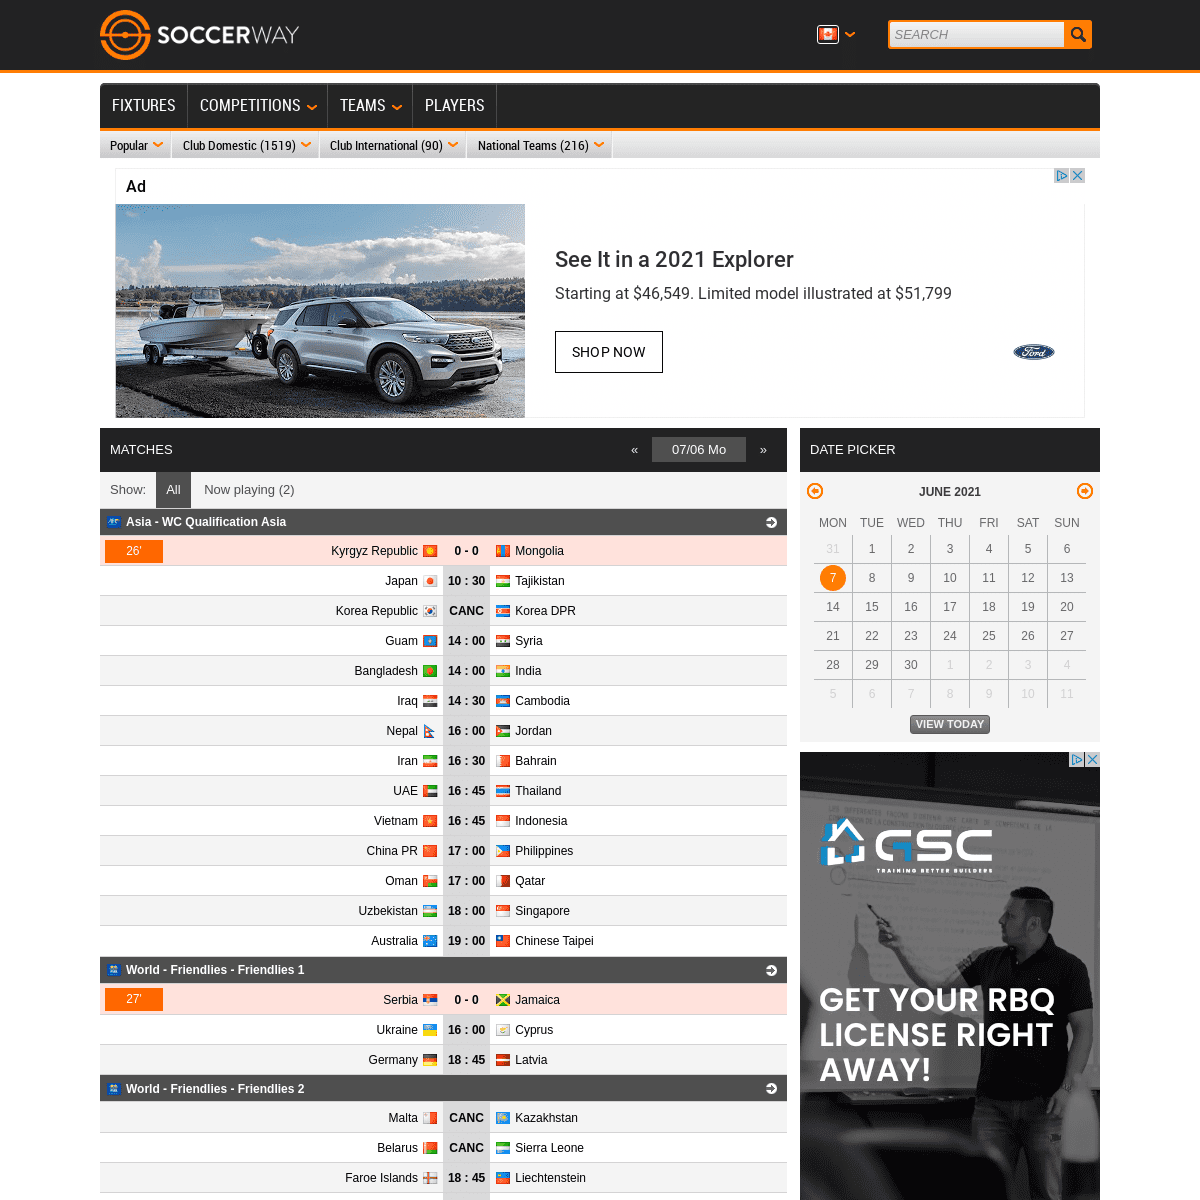 A complete backup of https://soccerway.com